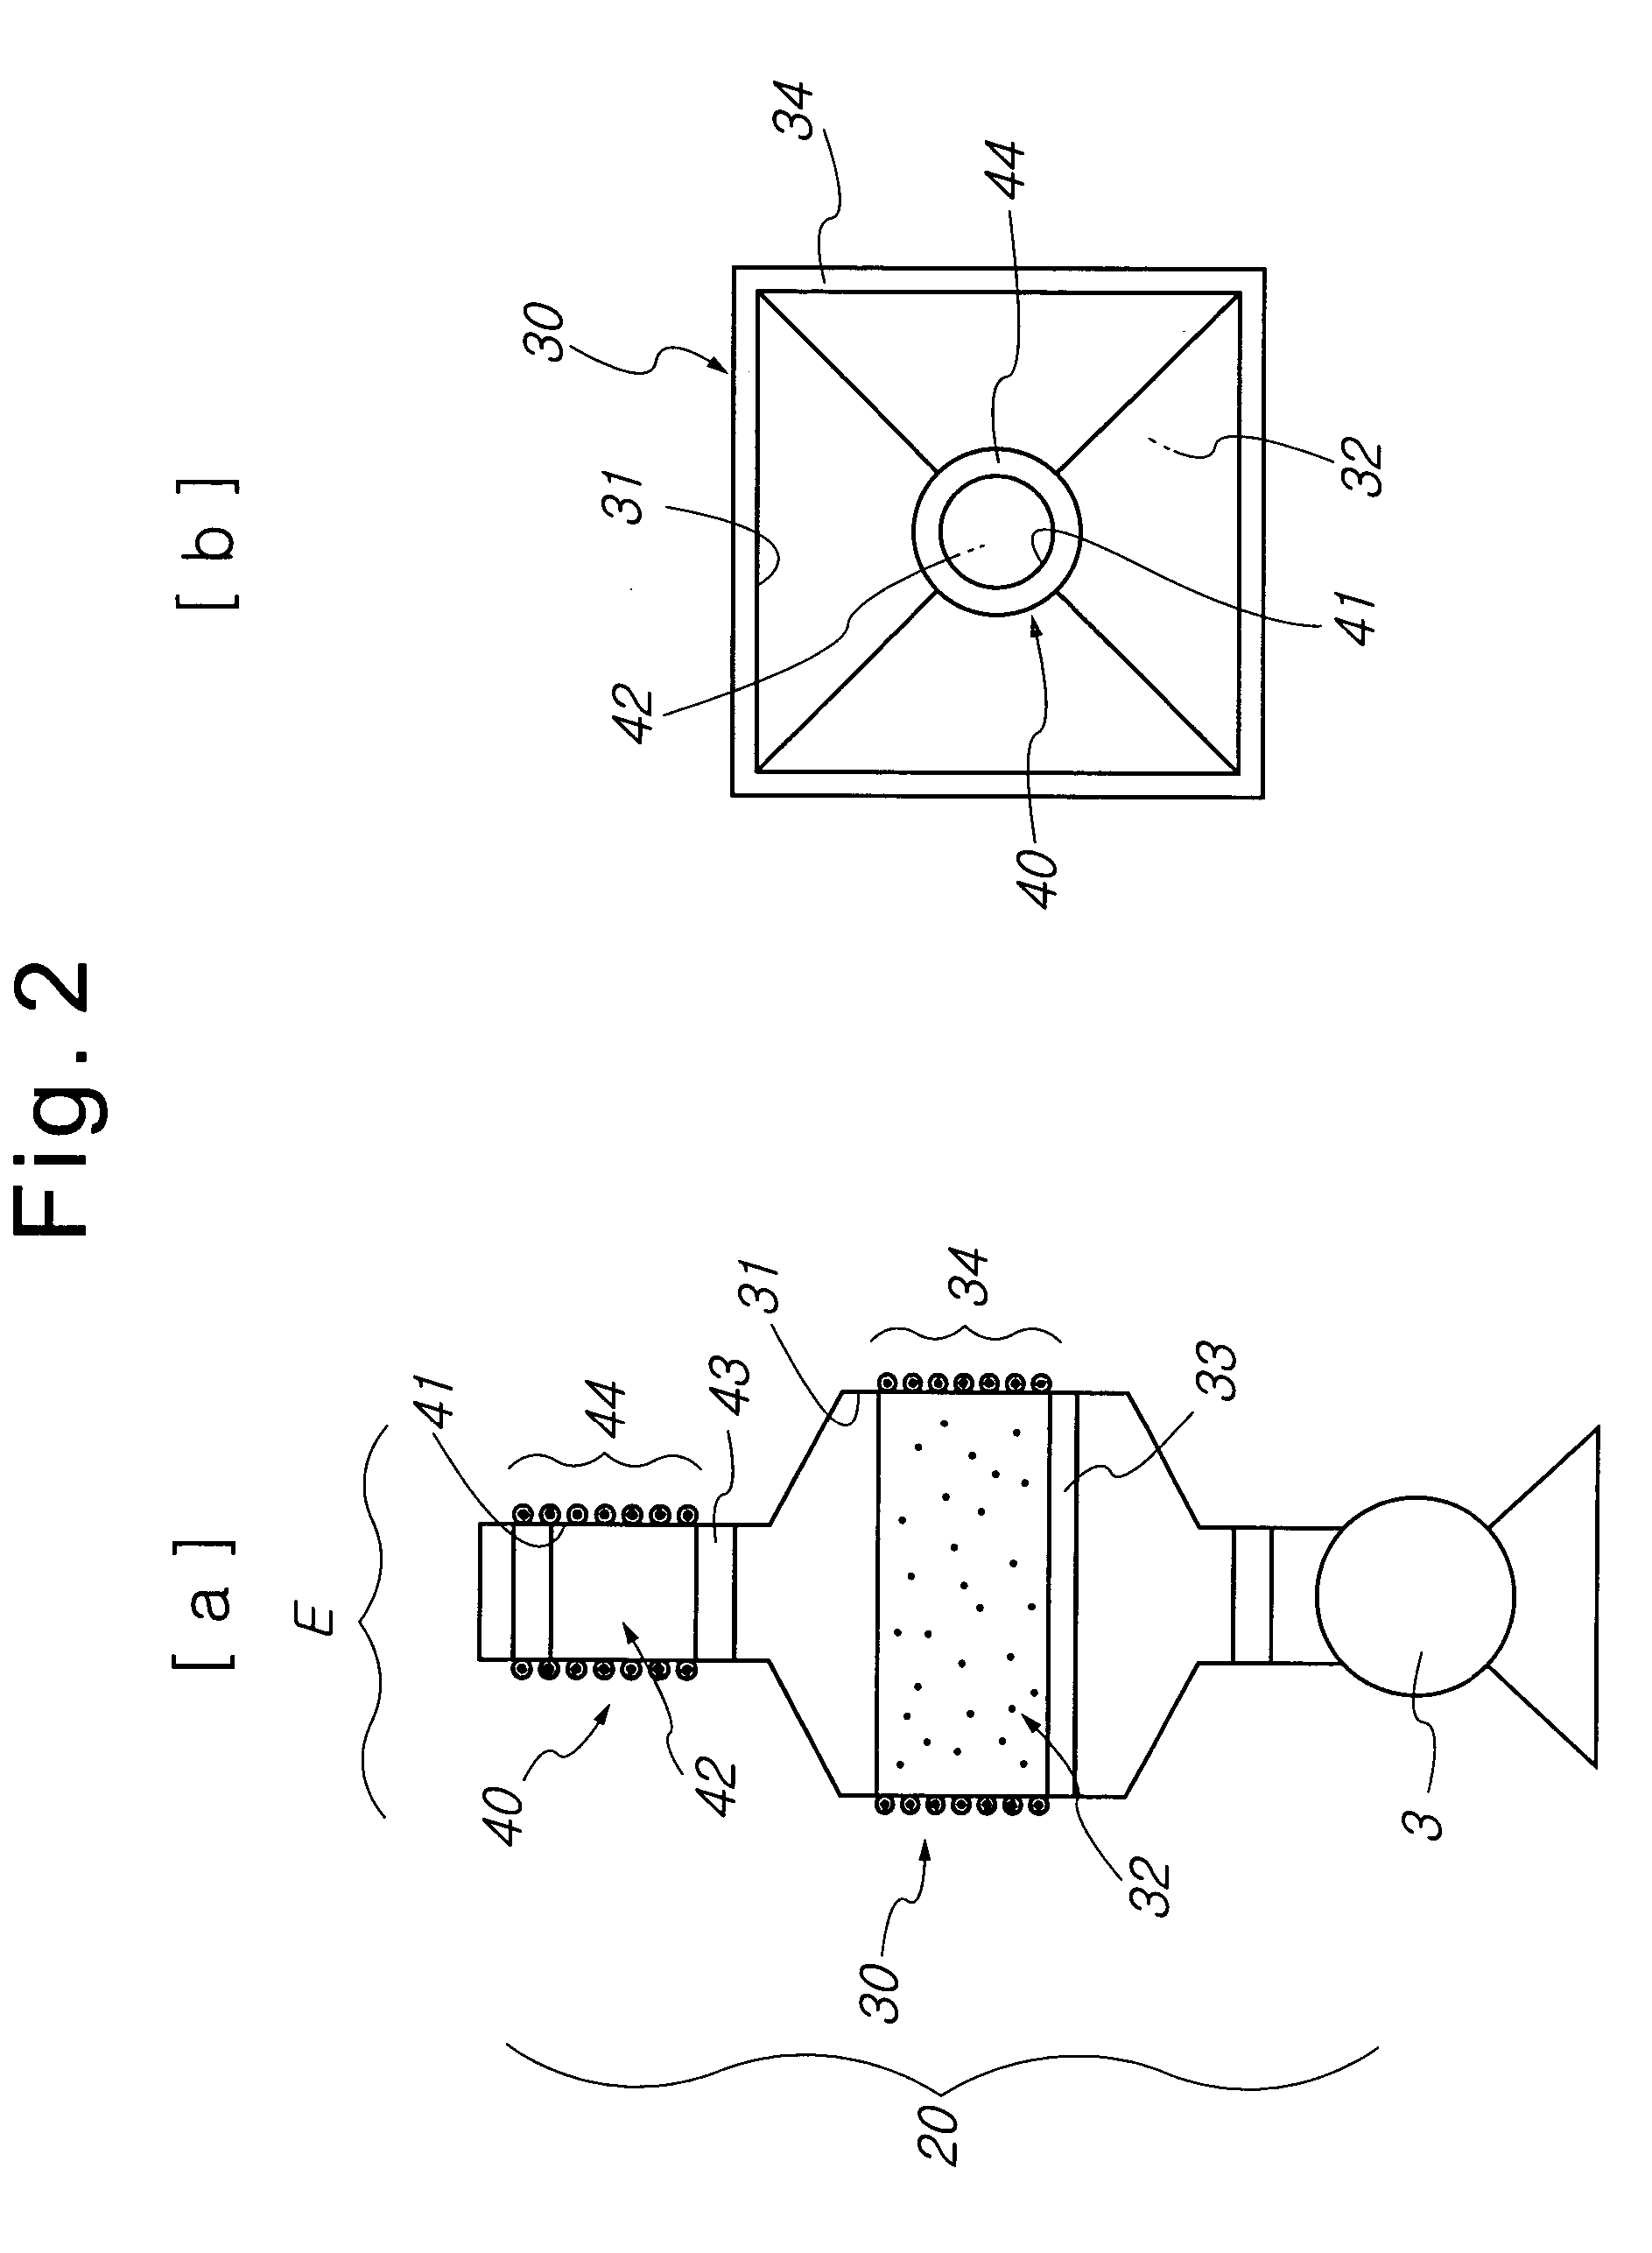 System for simultaneously removing dust and volatile toxic organic compounds